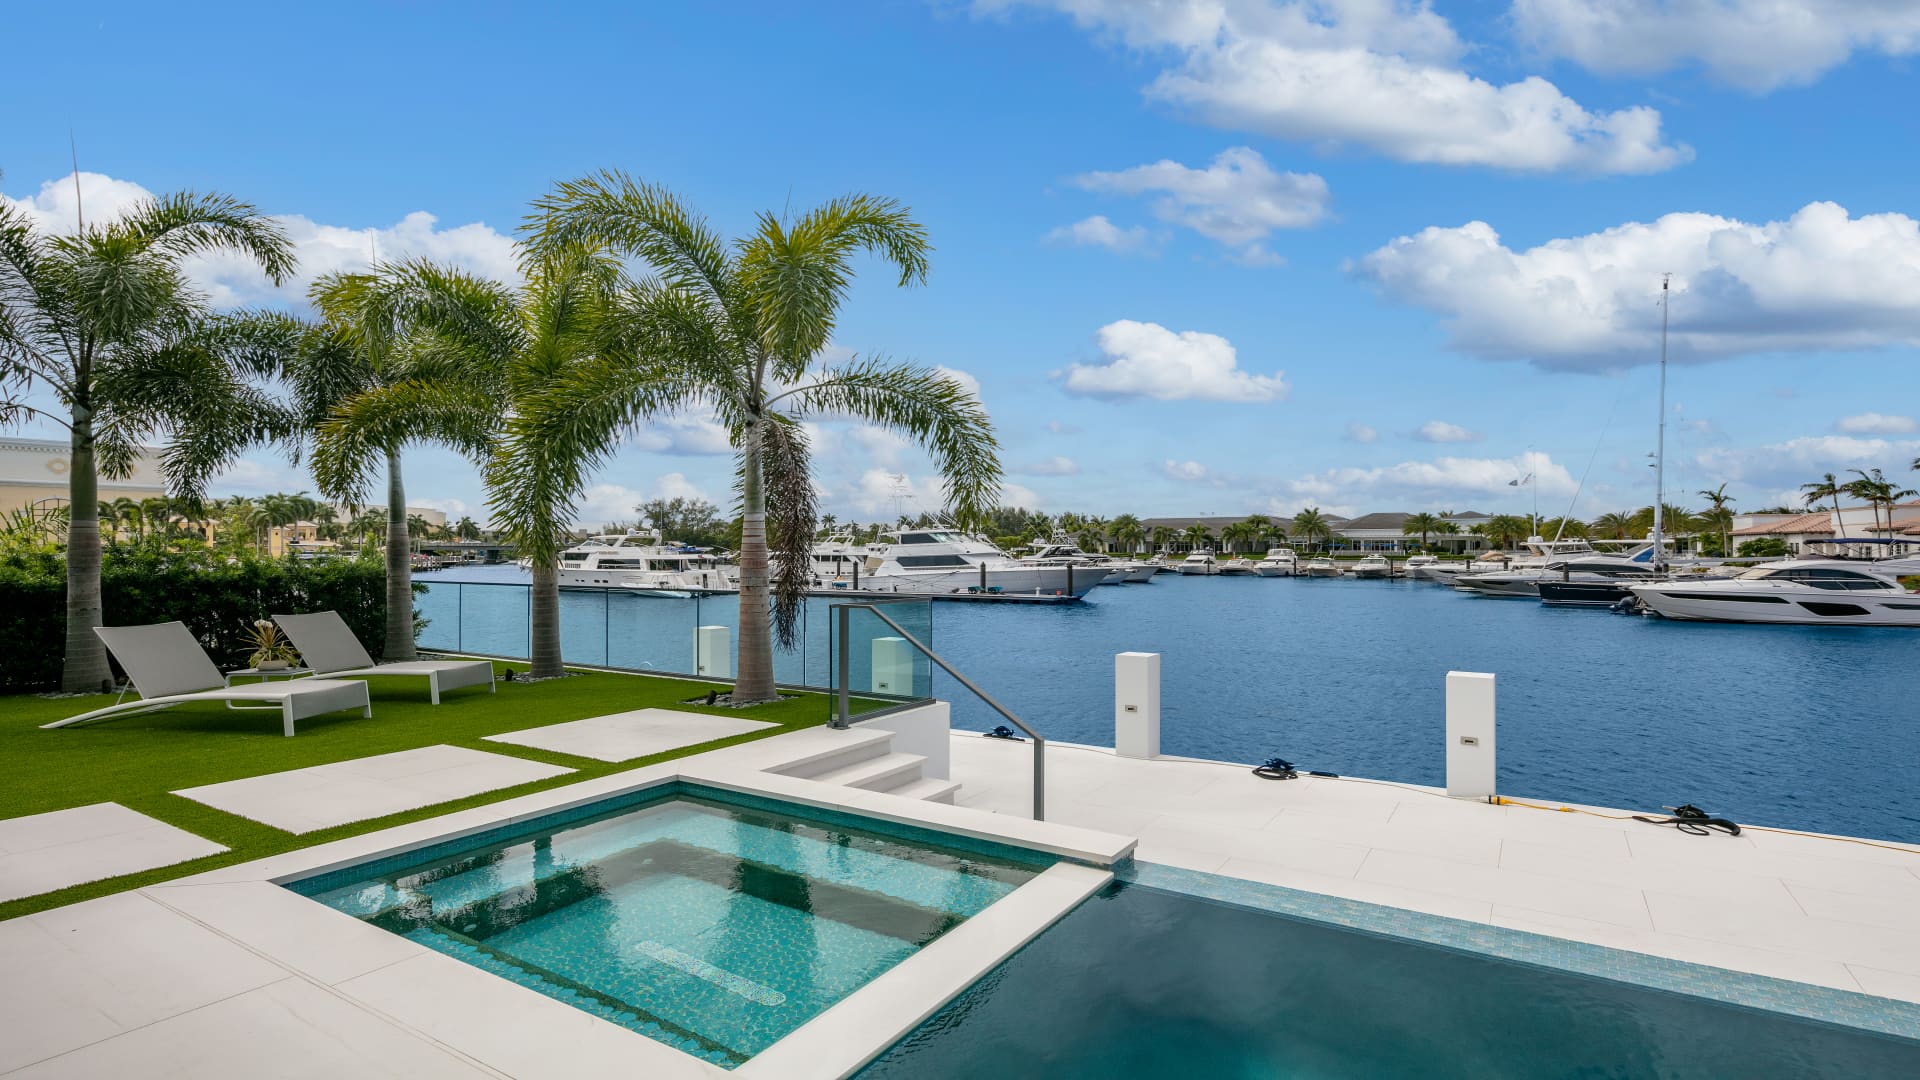 The pool and hot tub situated above the home's dock and overlook the community's marina.